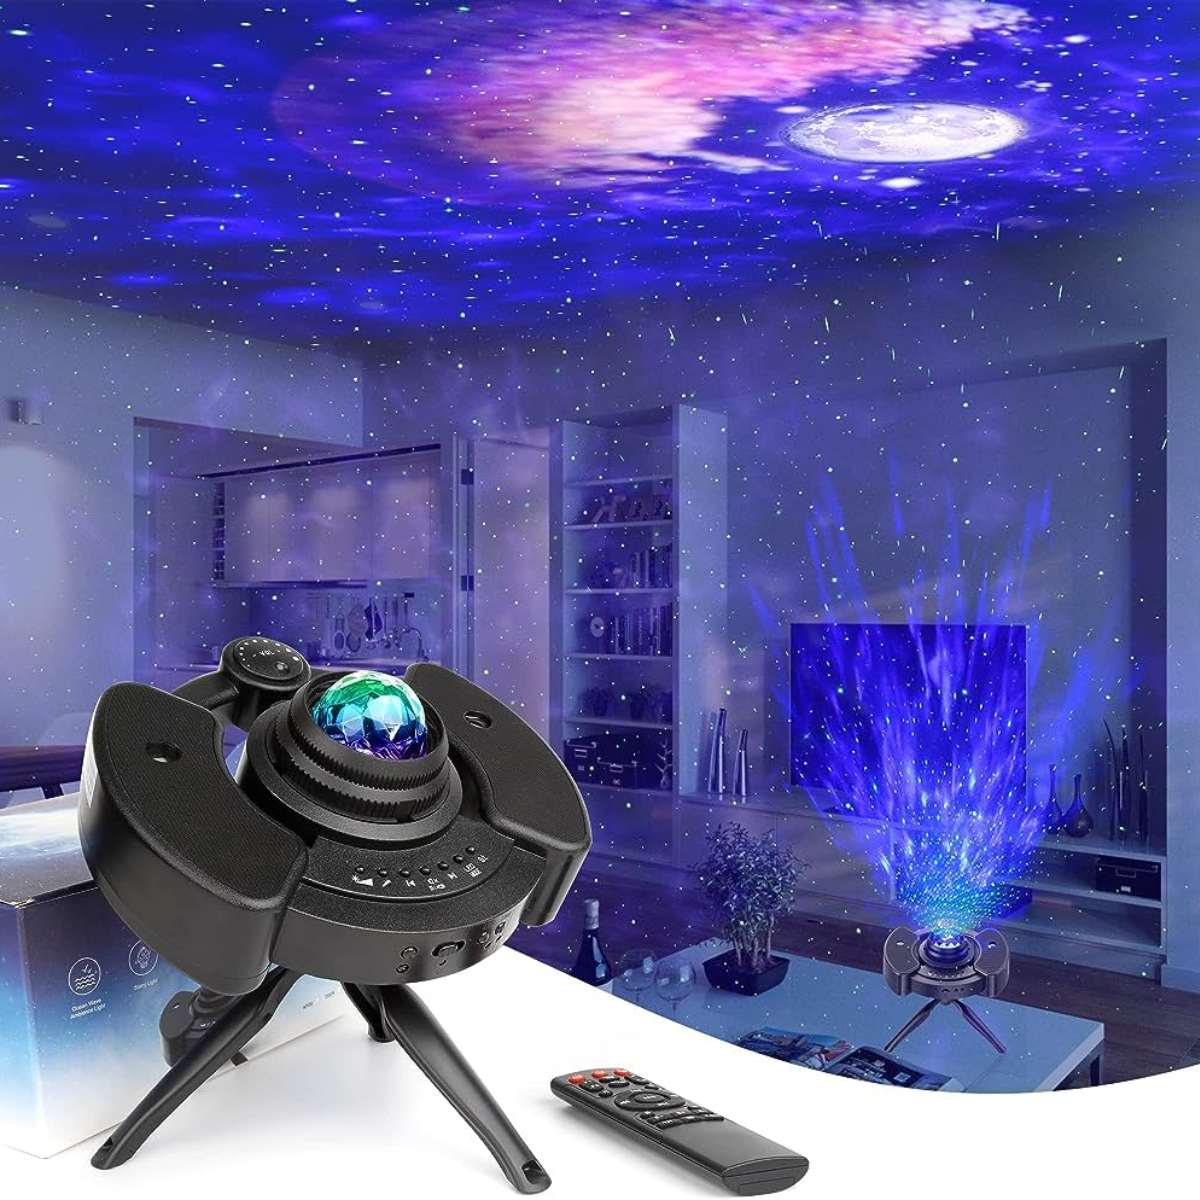 17. Turn Your Anniversary into a Magical Night with the Starry Sky Projector